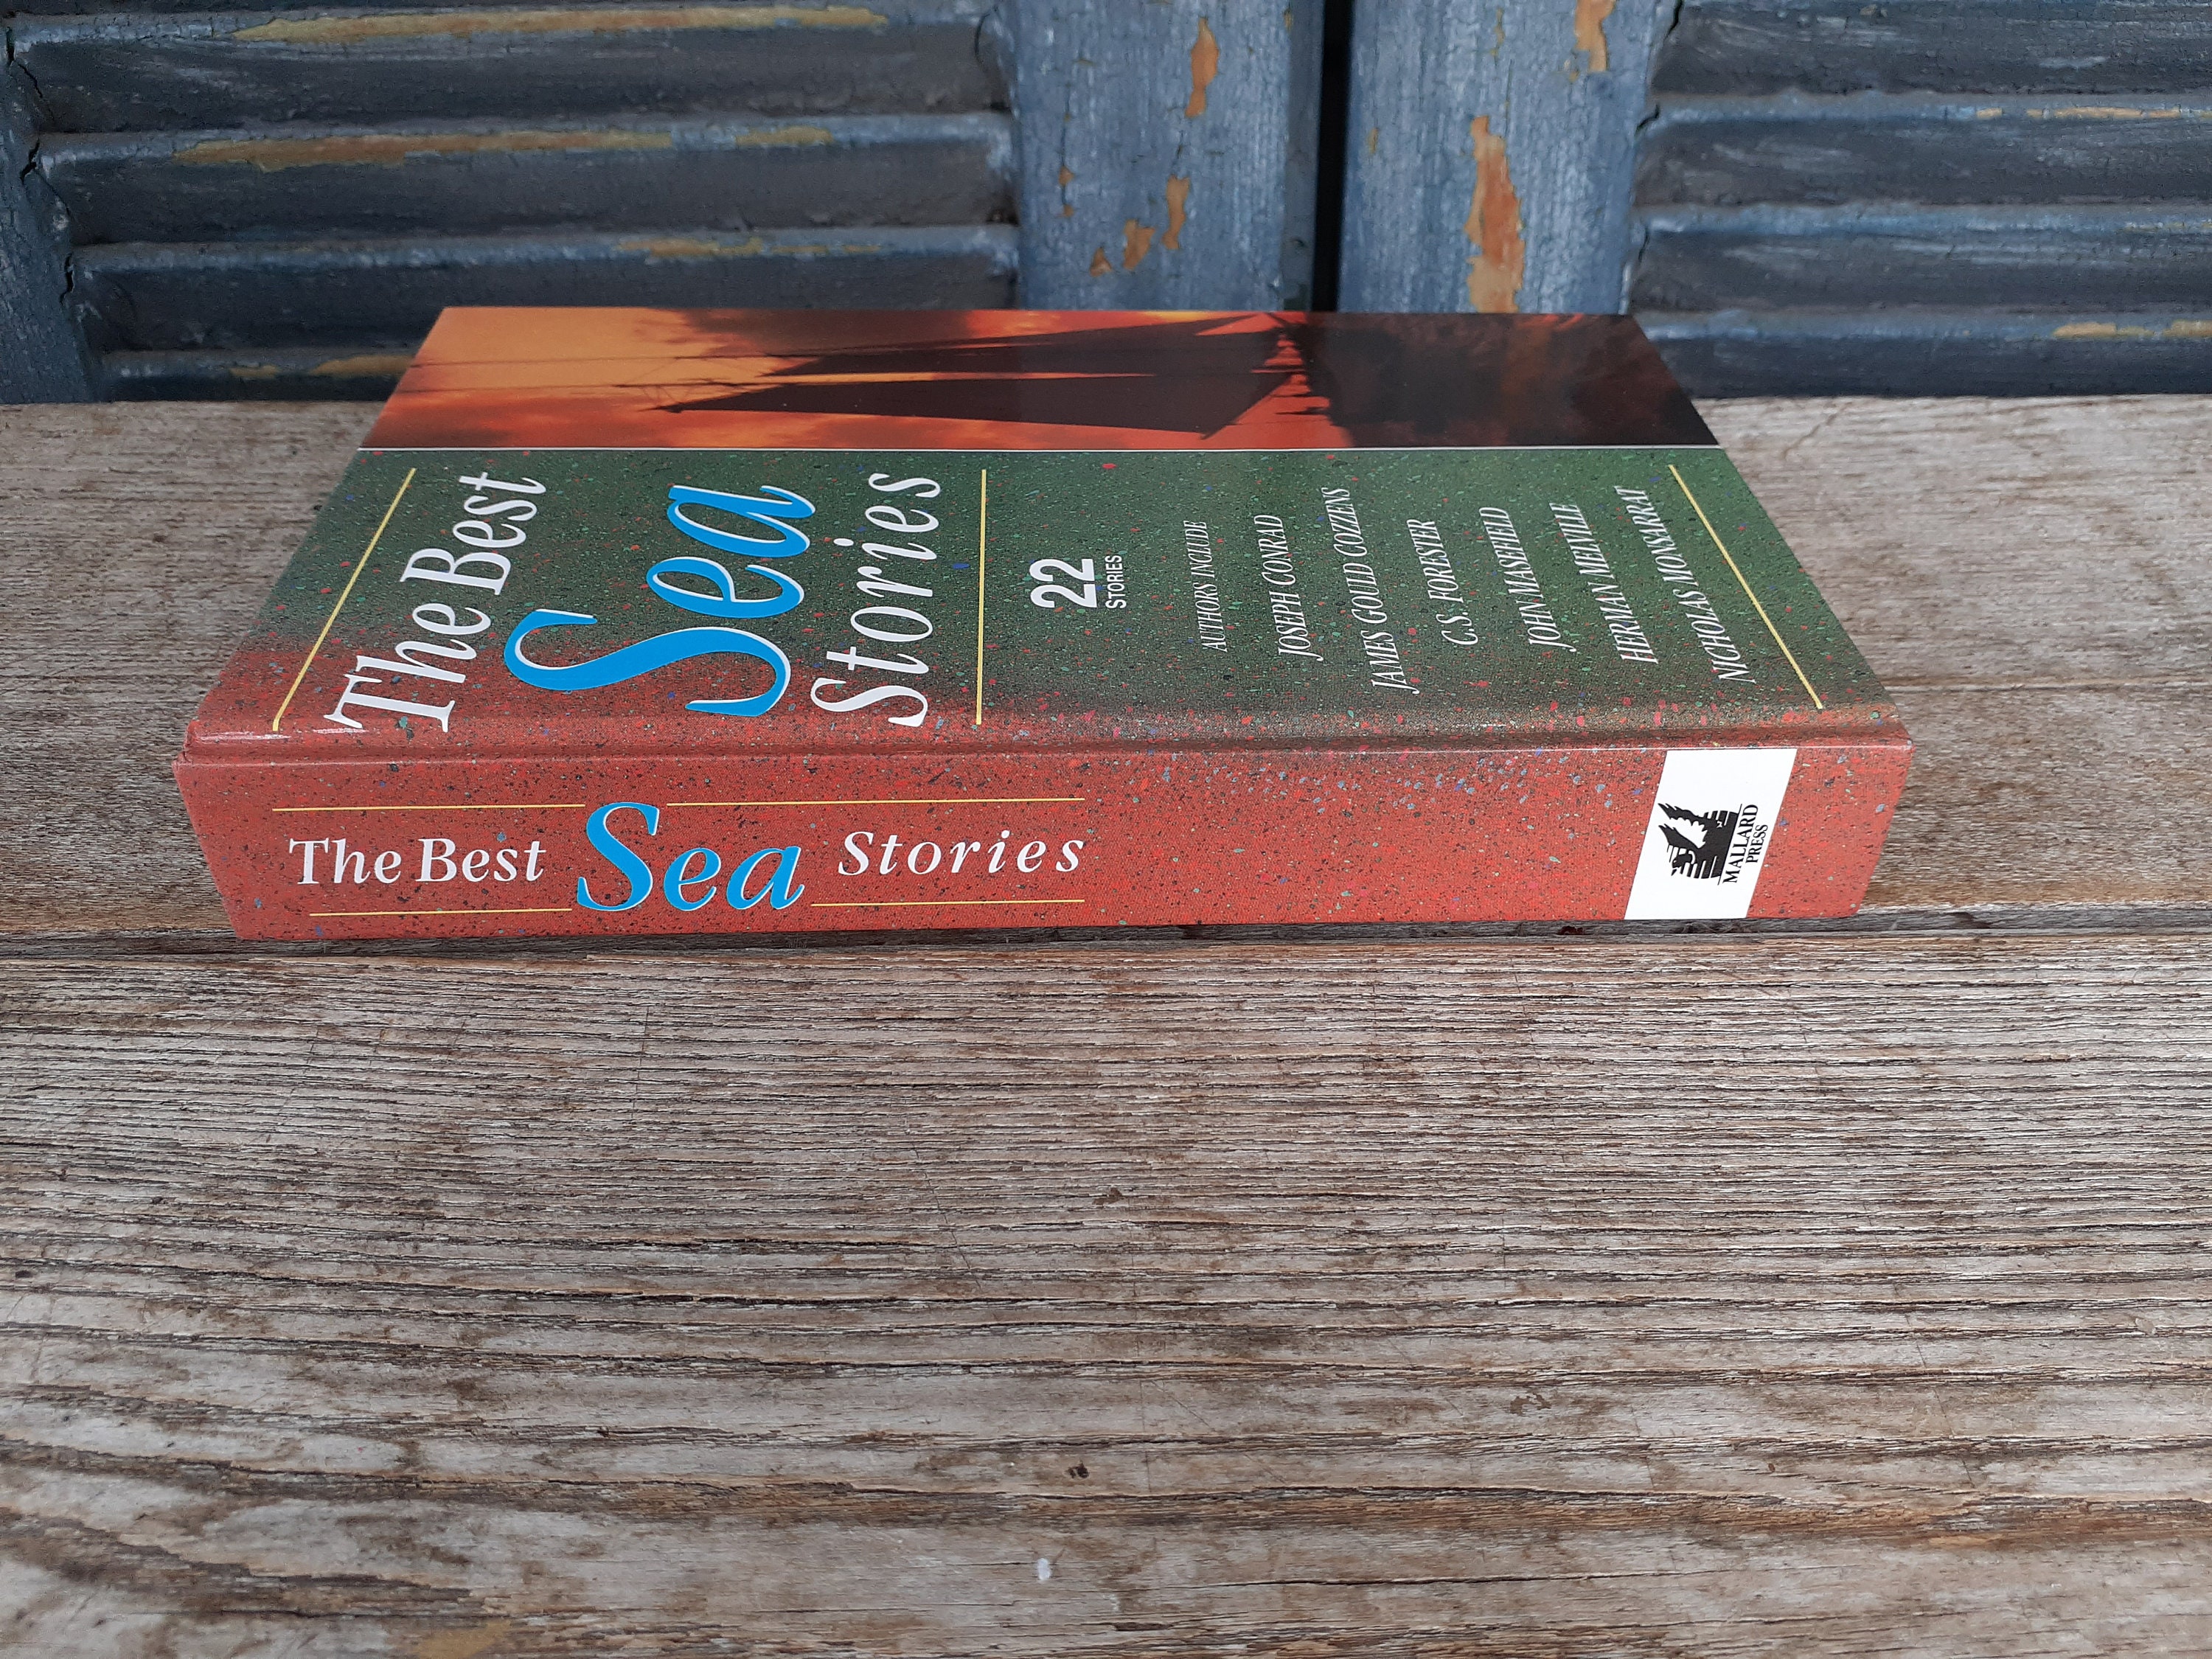 The Best Sea Stories 22 Stories Hardcover 1990 Conrad Melville - Etsy